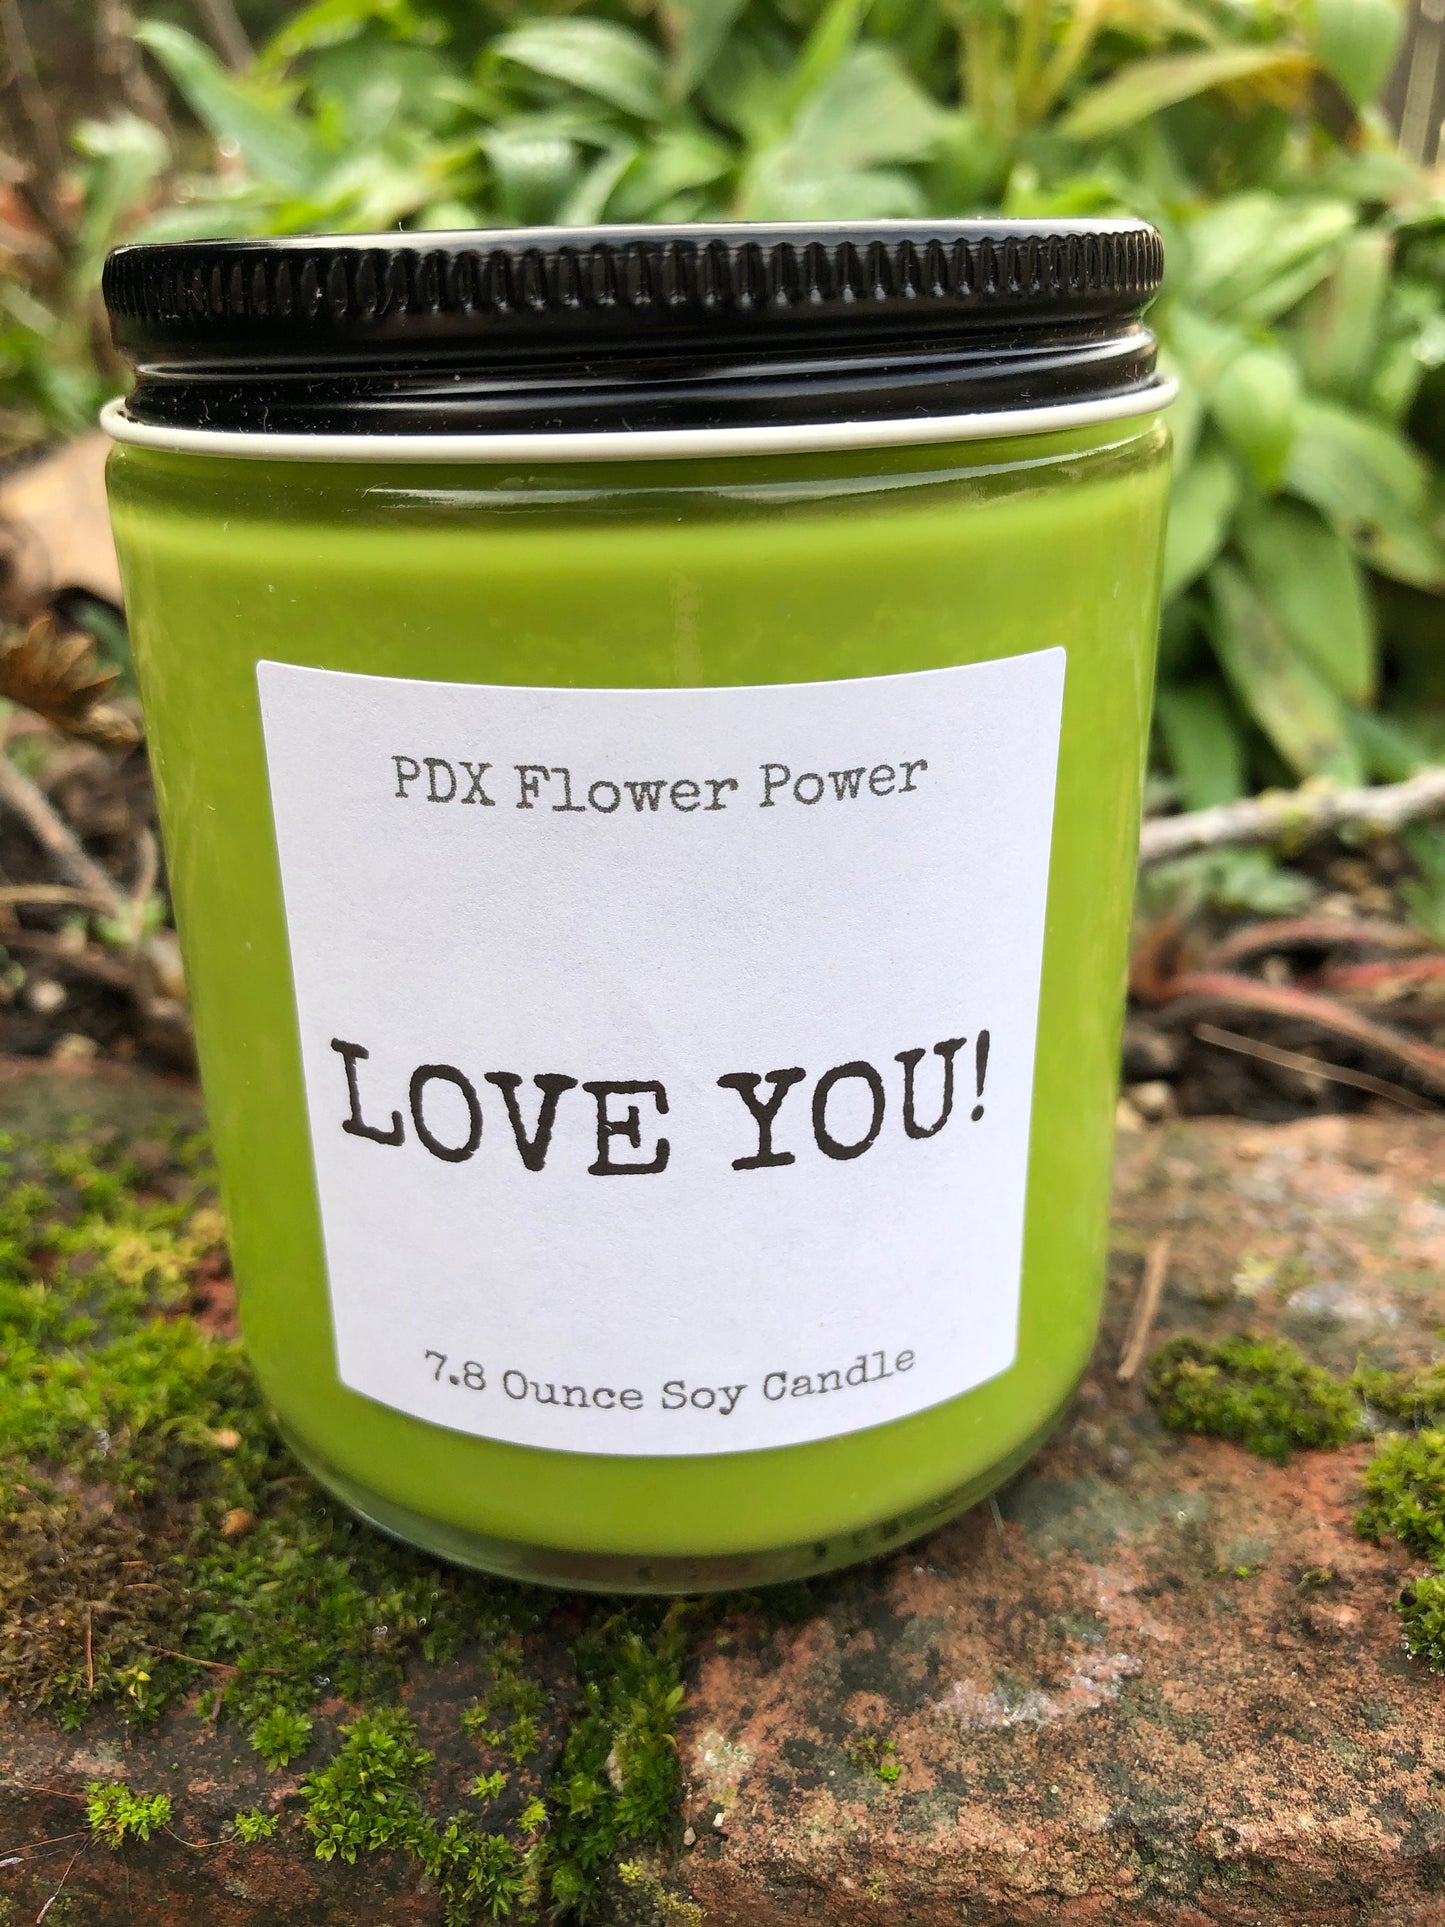 PDX Flower Power " Love you " handcrafted soy candle